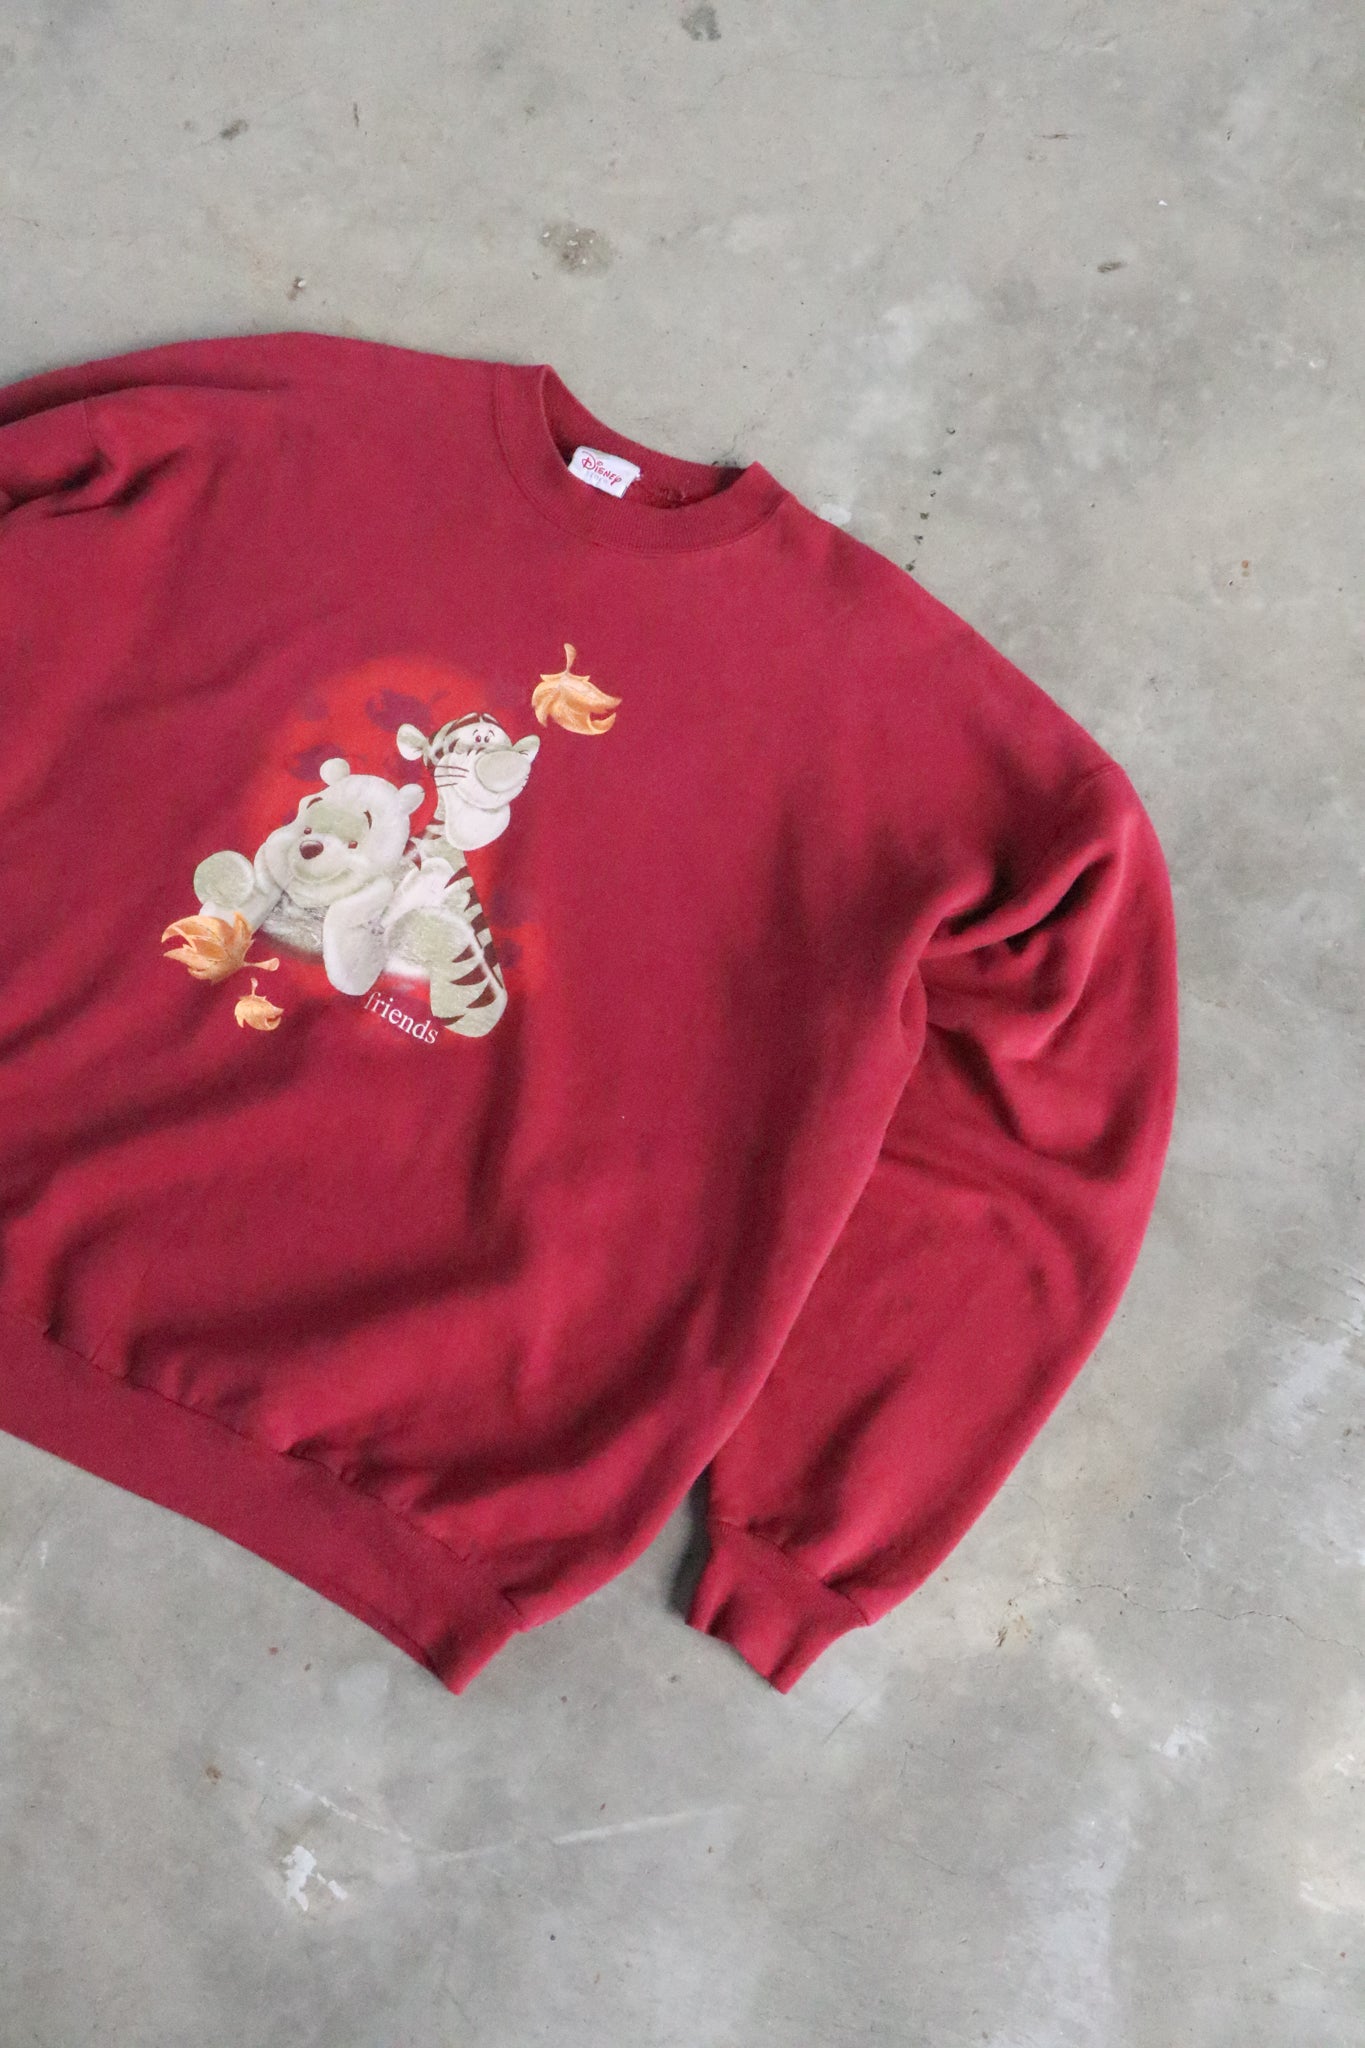 Vintage Pooh And Friends Sweater XL